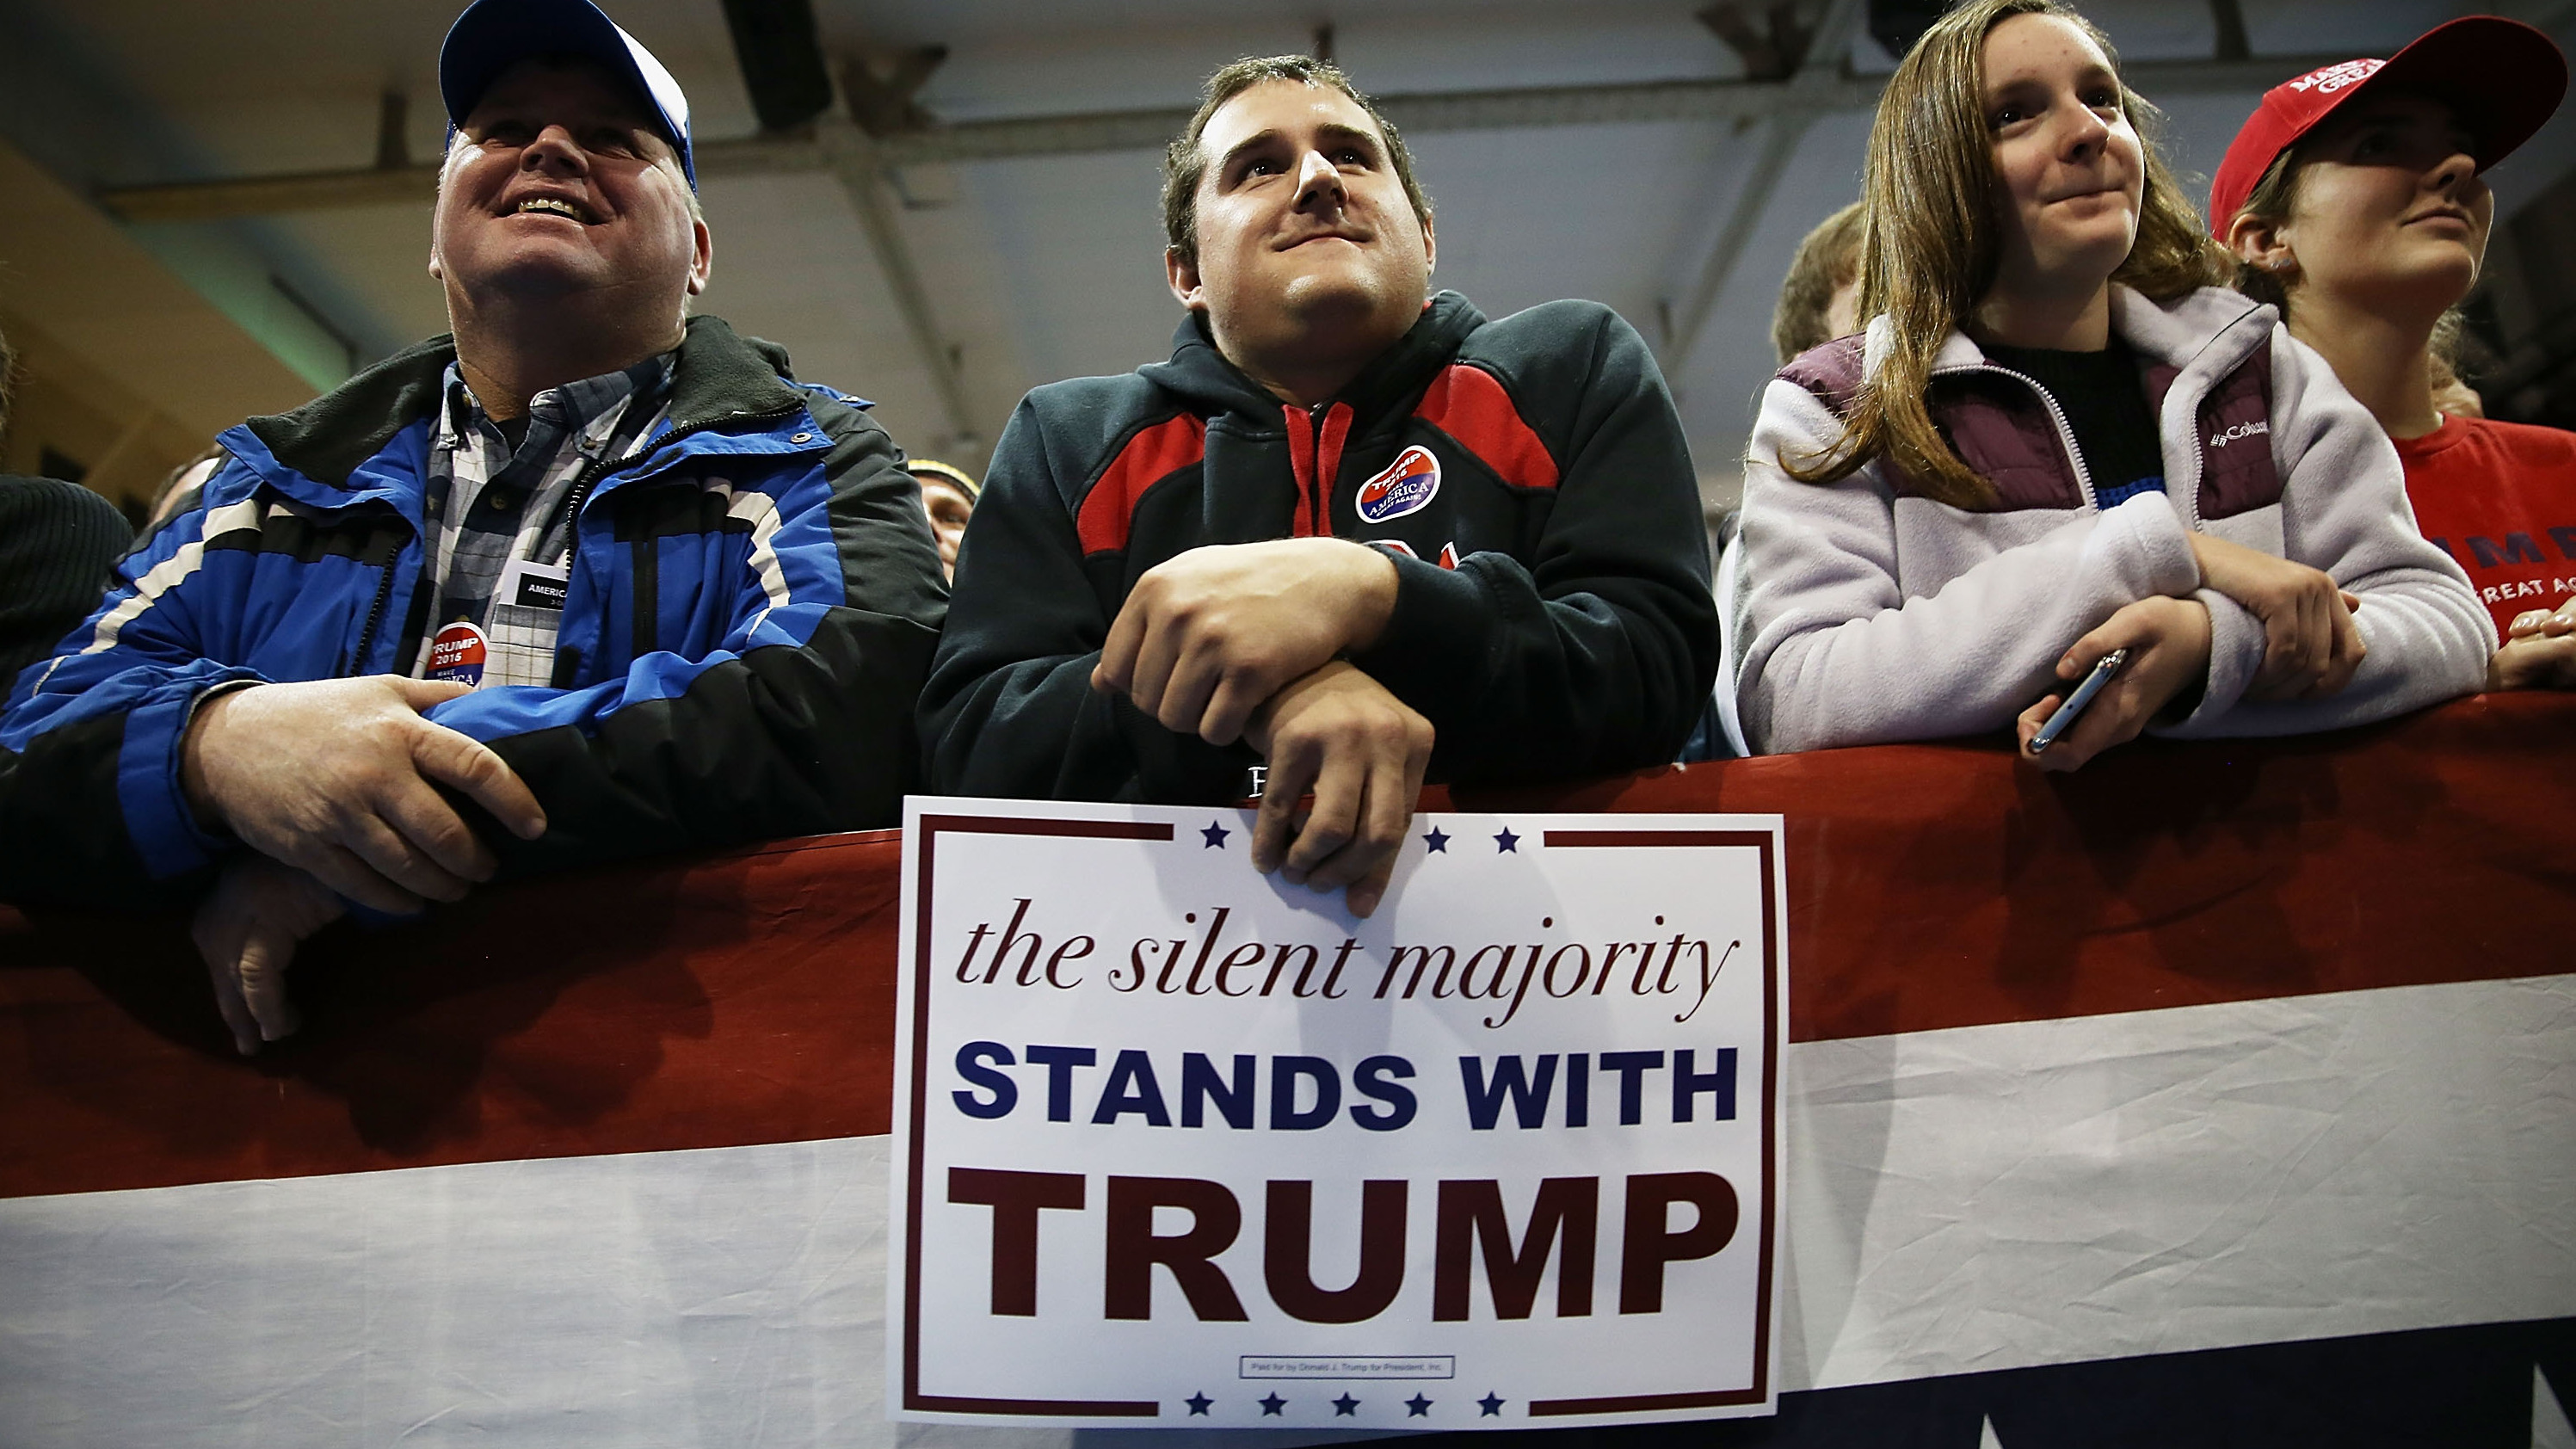 At Donald Trump rallies, like this one in Cedar Falls, Iowa, on Jan. 12, his campaign distributes signs heralding support from the "silent majority." (Joe Raedle/Getty Images)